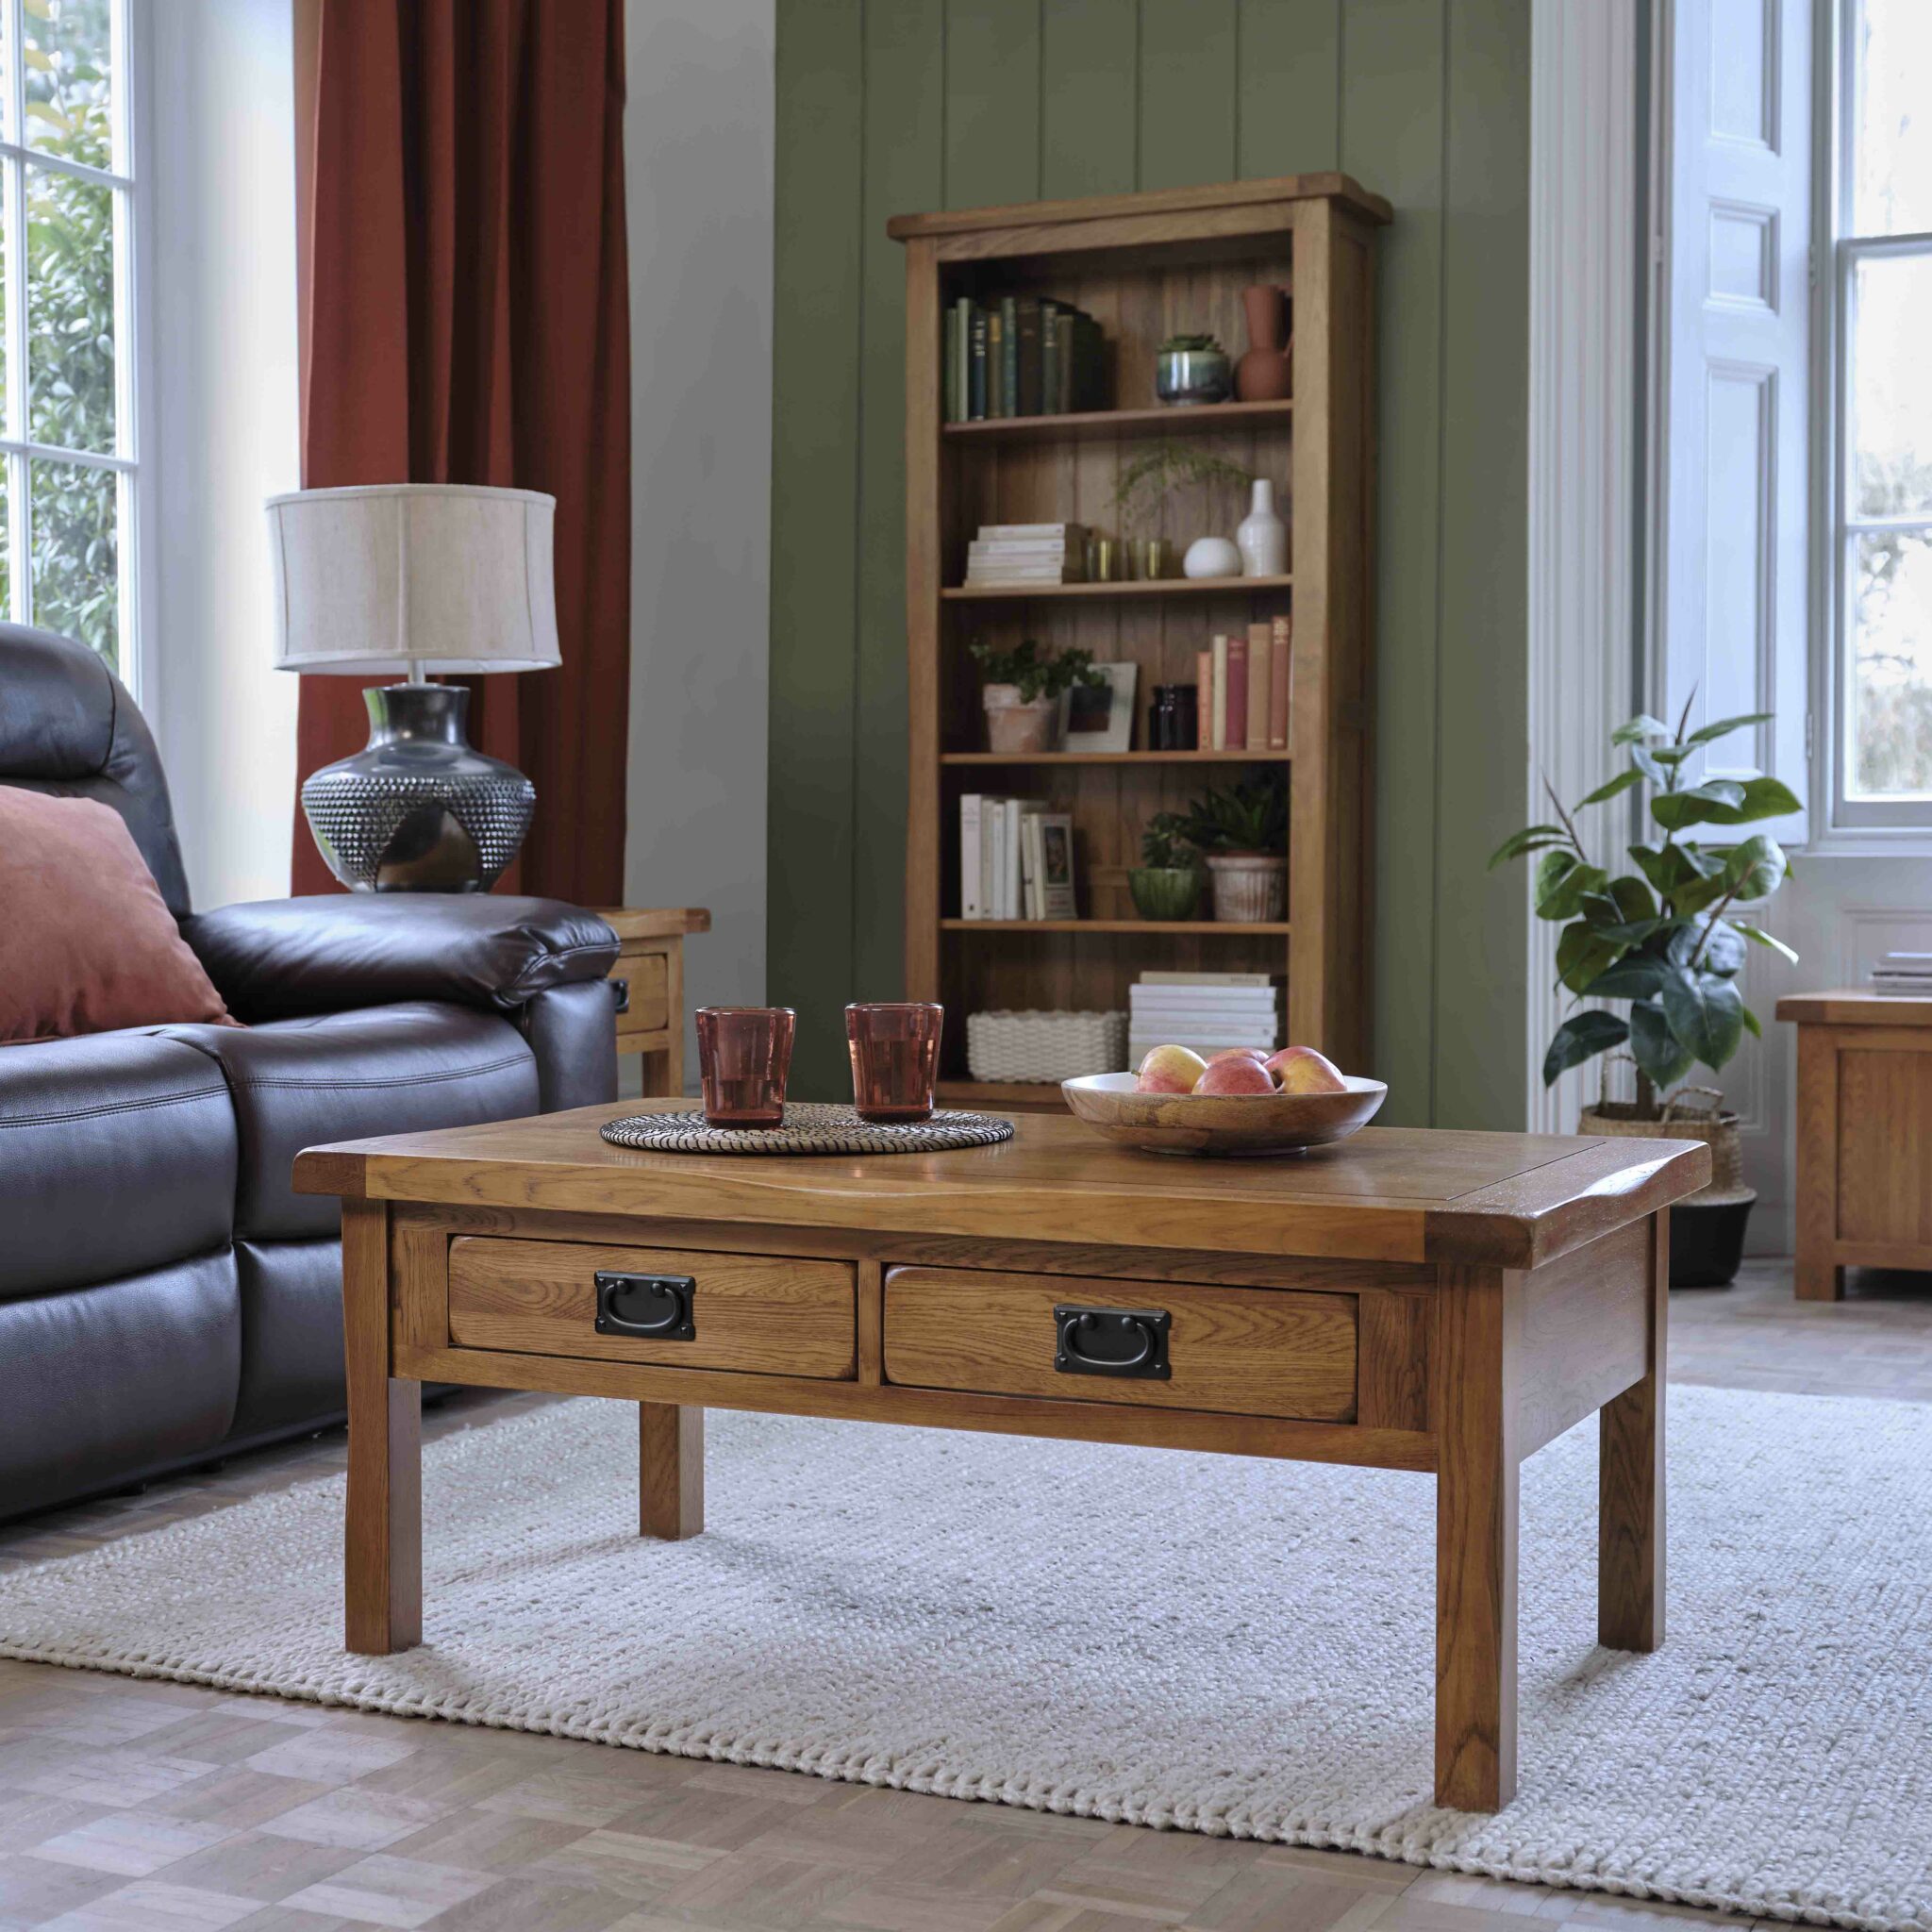 How to style your coffee table by Oak Furnitureland | The Oak ...